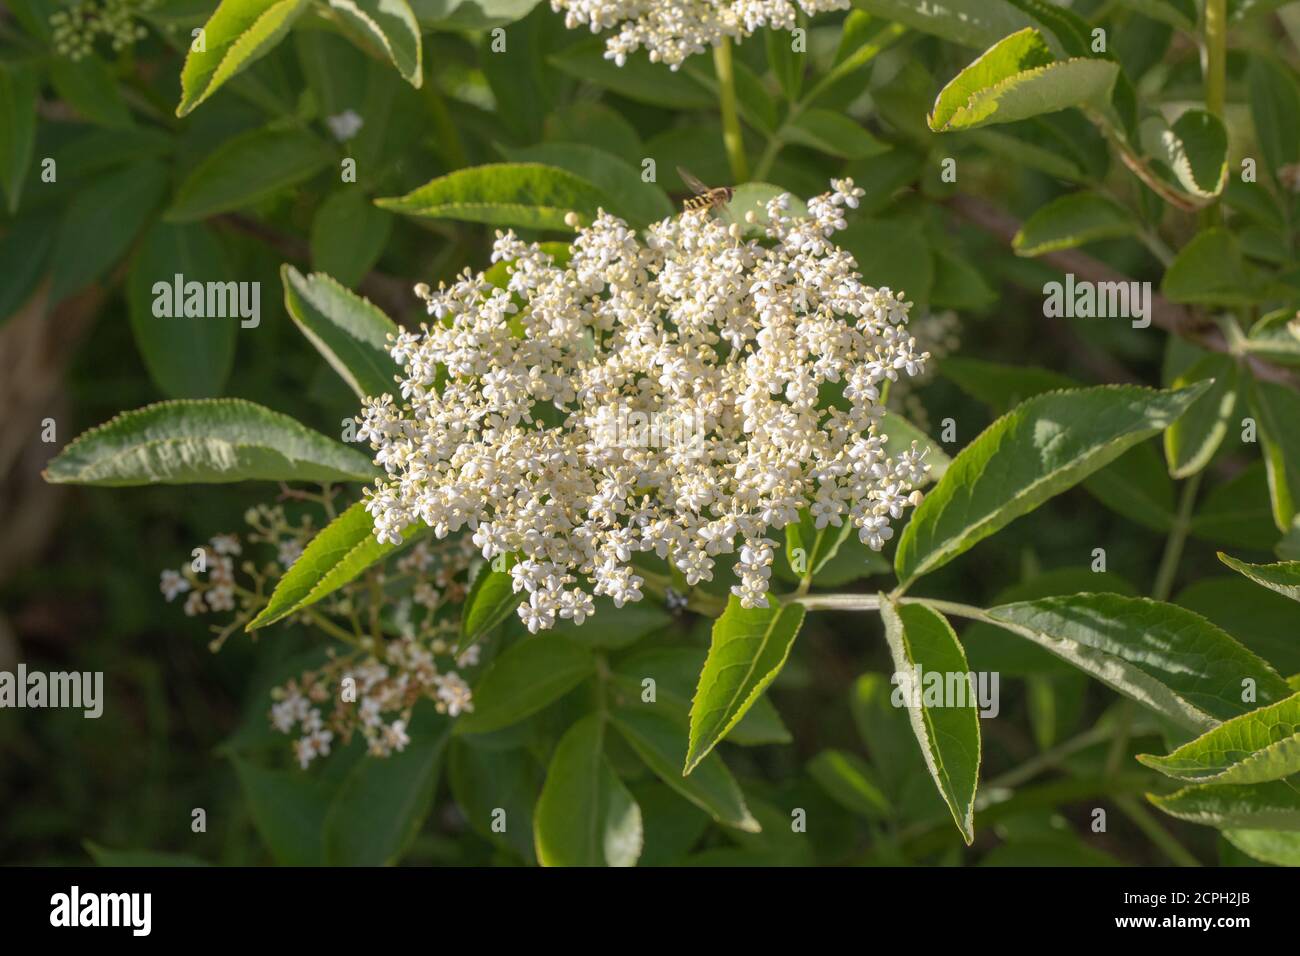 Elder (Sambucus nigra). Multiple bunches of flat-topped heads of numerous cream-white flowers. Stalked compound leaves of five to severn leaflets. Att Stock Photo